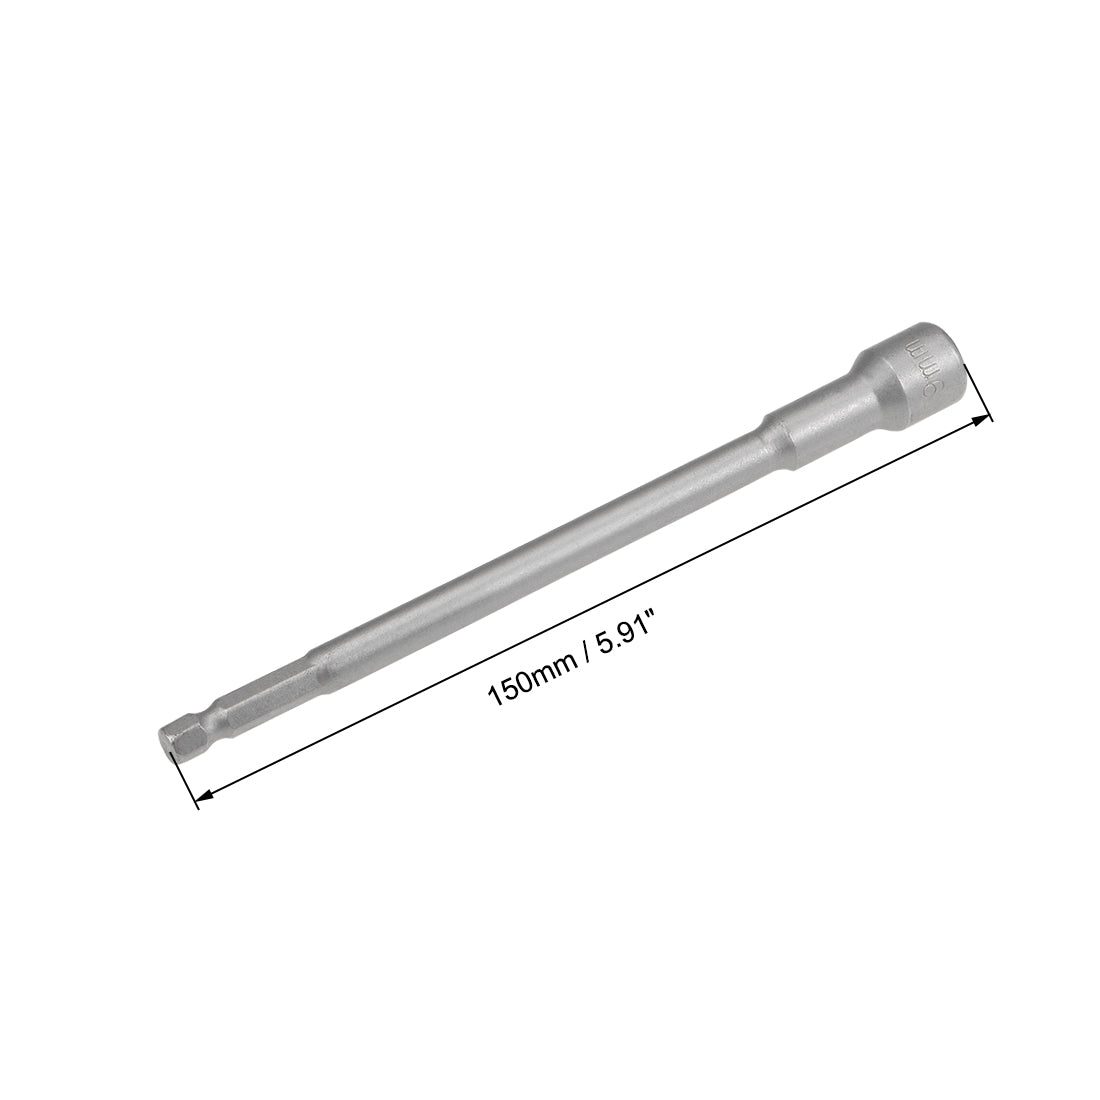 Uxcell Uxcell 1/4" Quick-Change Hex Shank 6mm Magnetic Nut Sockets Driver Wrench, 150mm Length